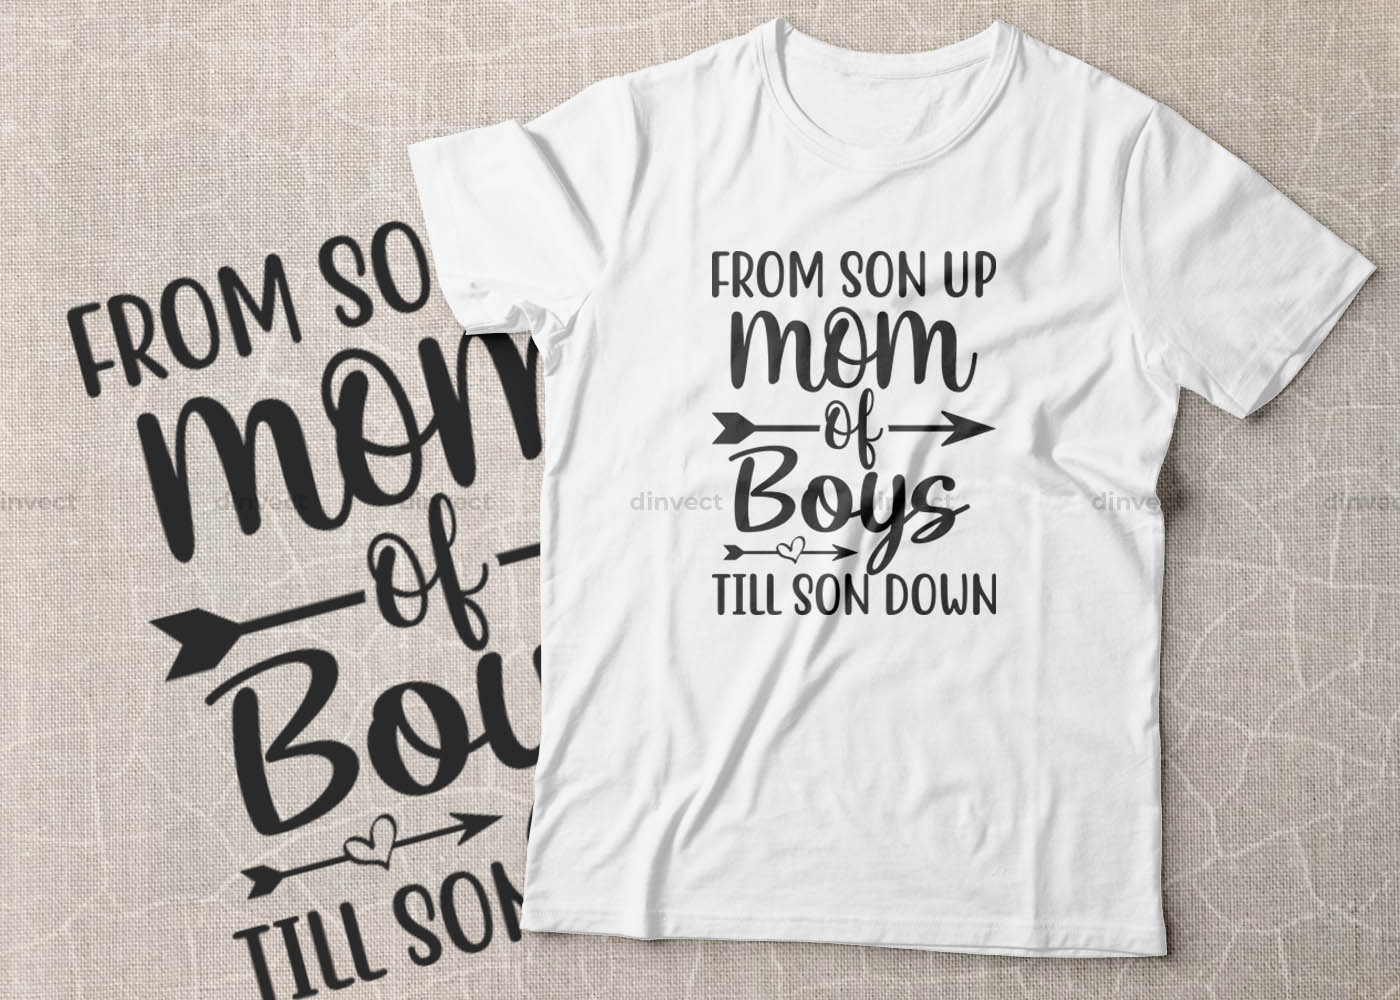 Download From Son Up Mom Of Boys Till Son Down Svg Mom Svg Mothers Day T Shirt Design Happy Mothers Day Svg Mother S Day Cricut Files Mom Gift Cameo Vinyl Designs Iron On Decals